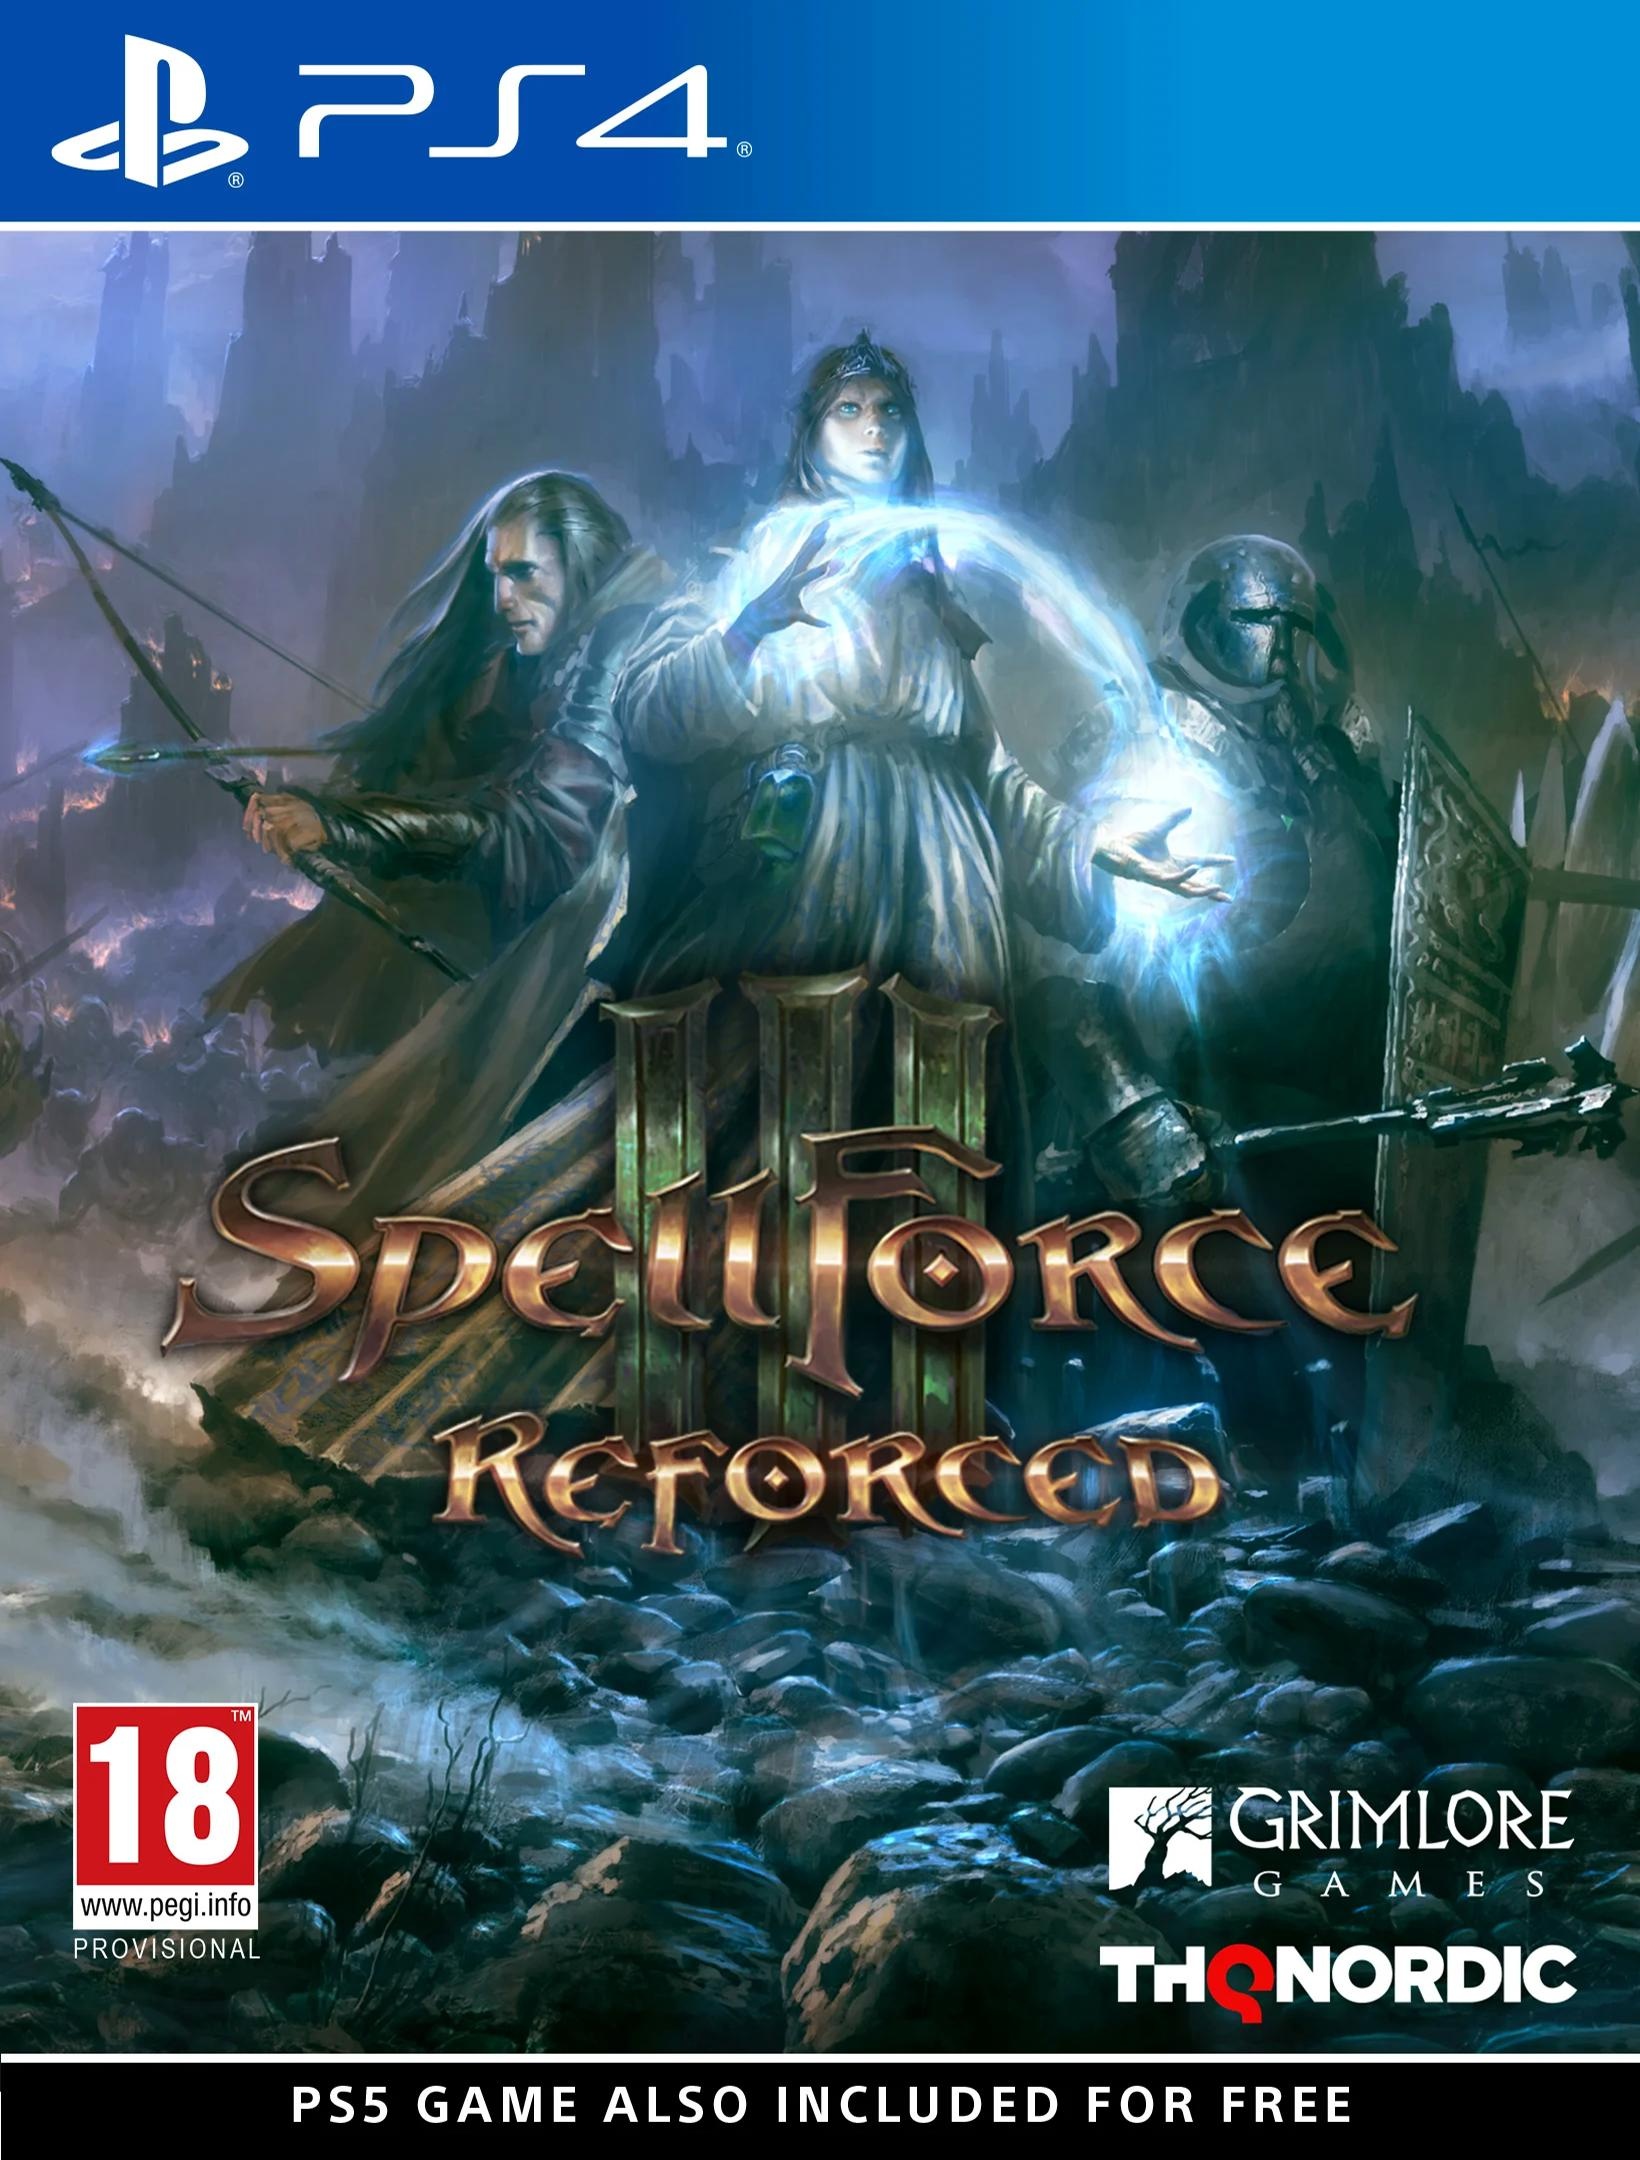 THQ, SpellForce 3 Reforced